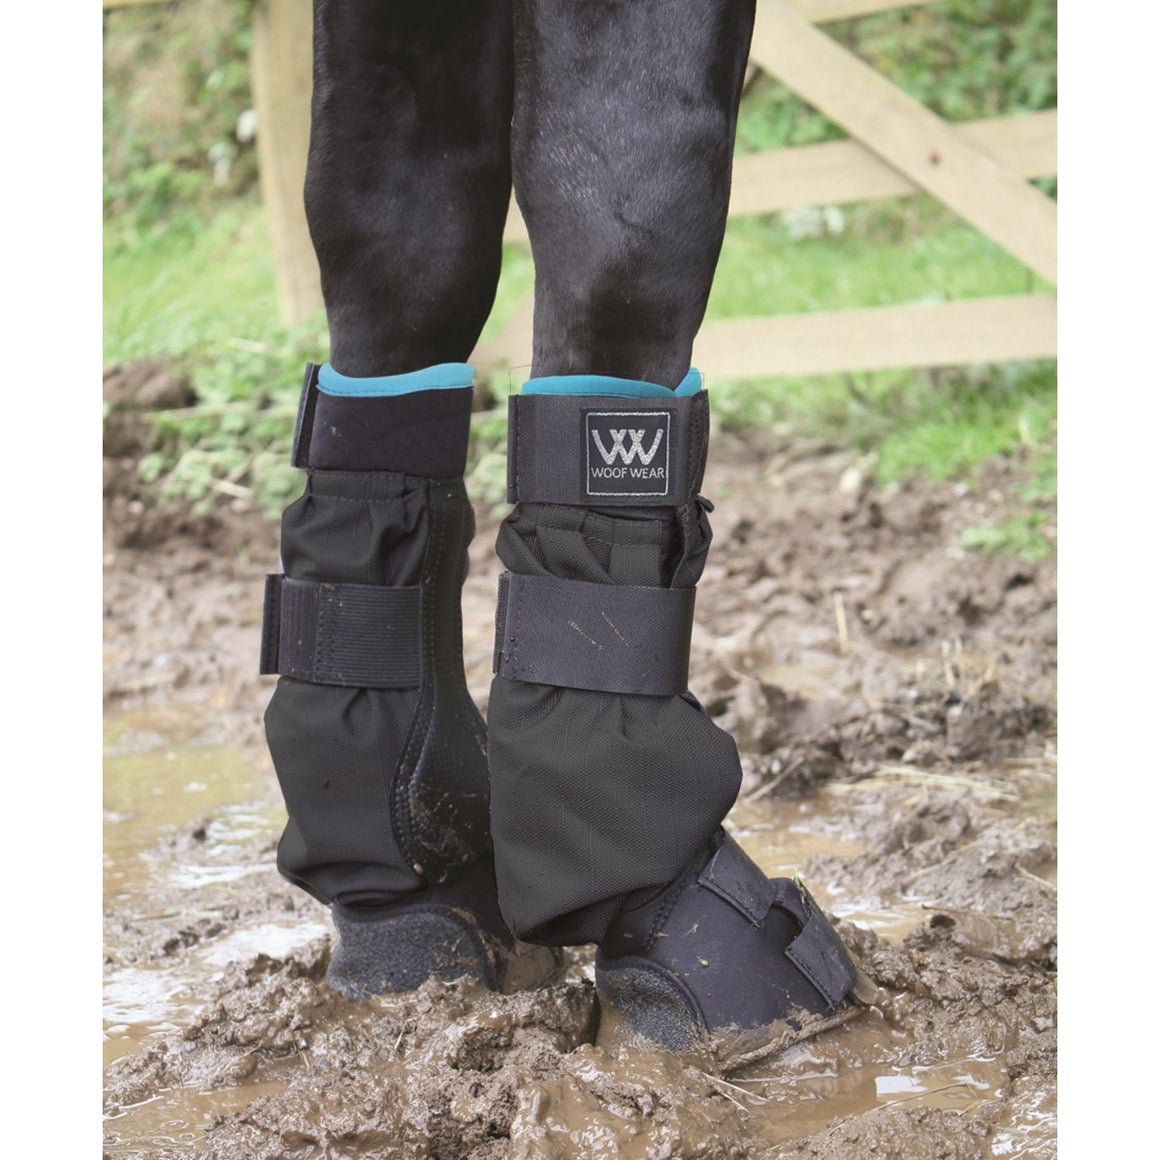 Equine Wear Tagged Woof Wear - Summerside Tack and Equestrian Wear